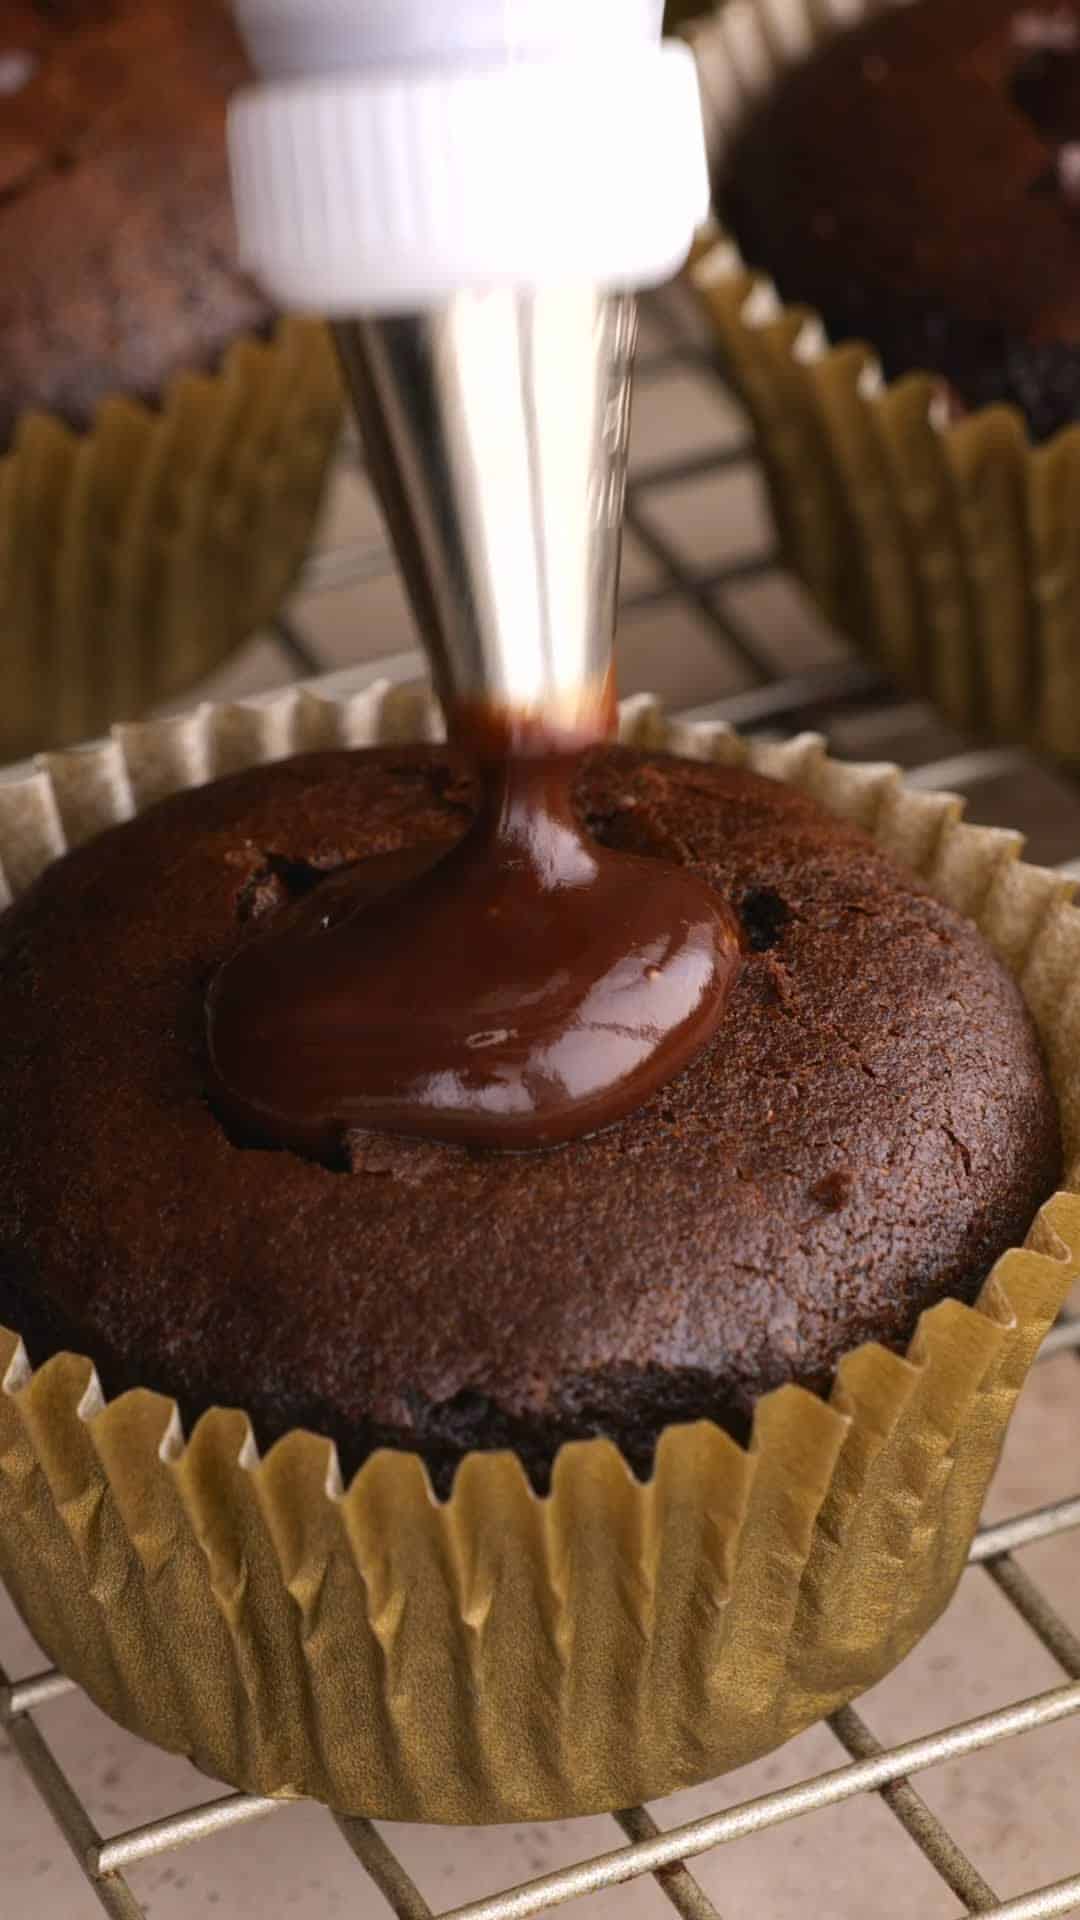 Chocolate ganache being piped into a chocolate cupcake